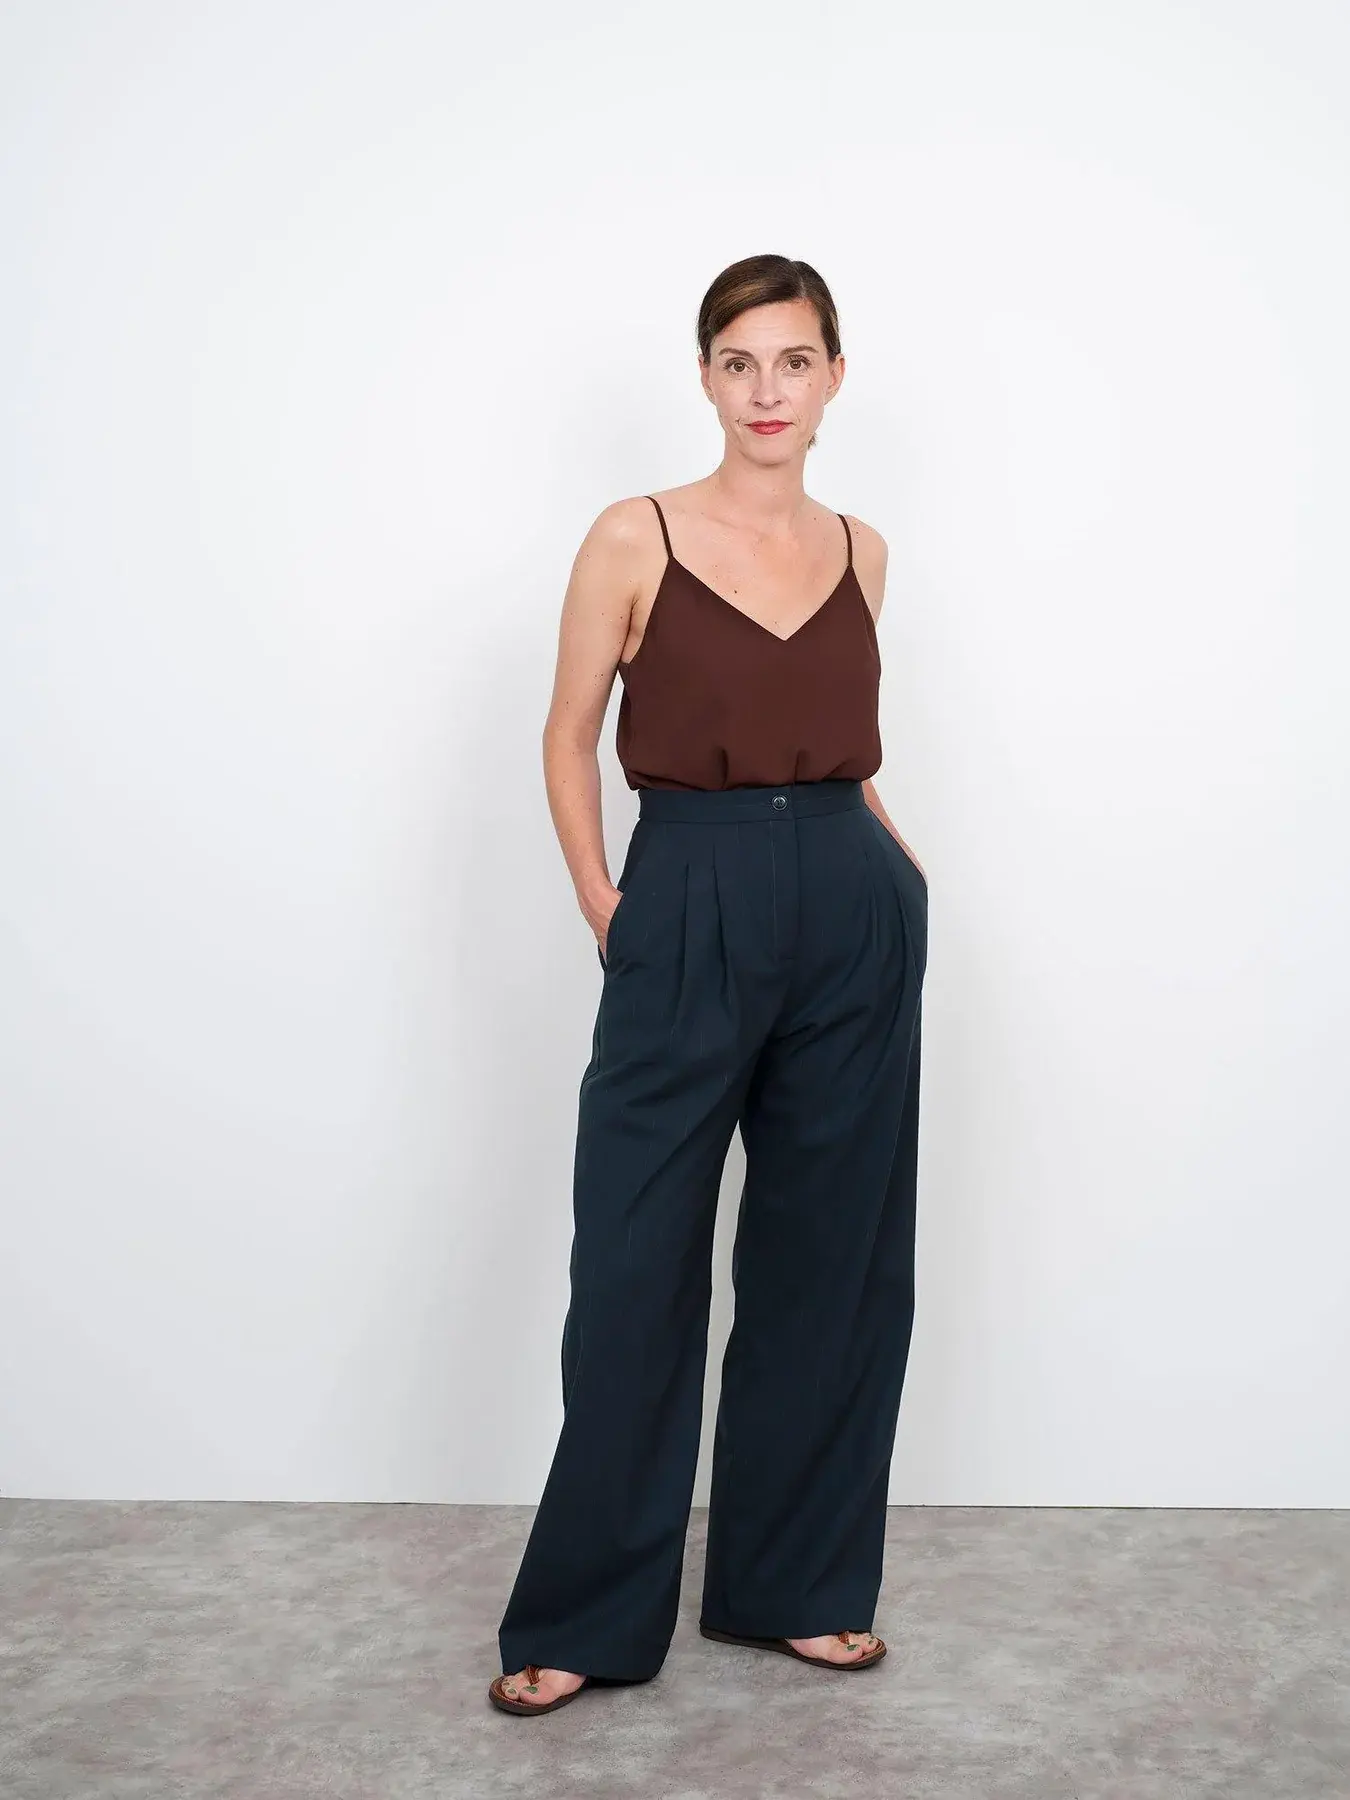 The Assembly Line Patterns The Assembly Line Patterns- High Waisted Trouser XL-3XL